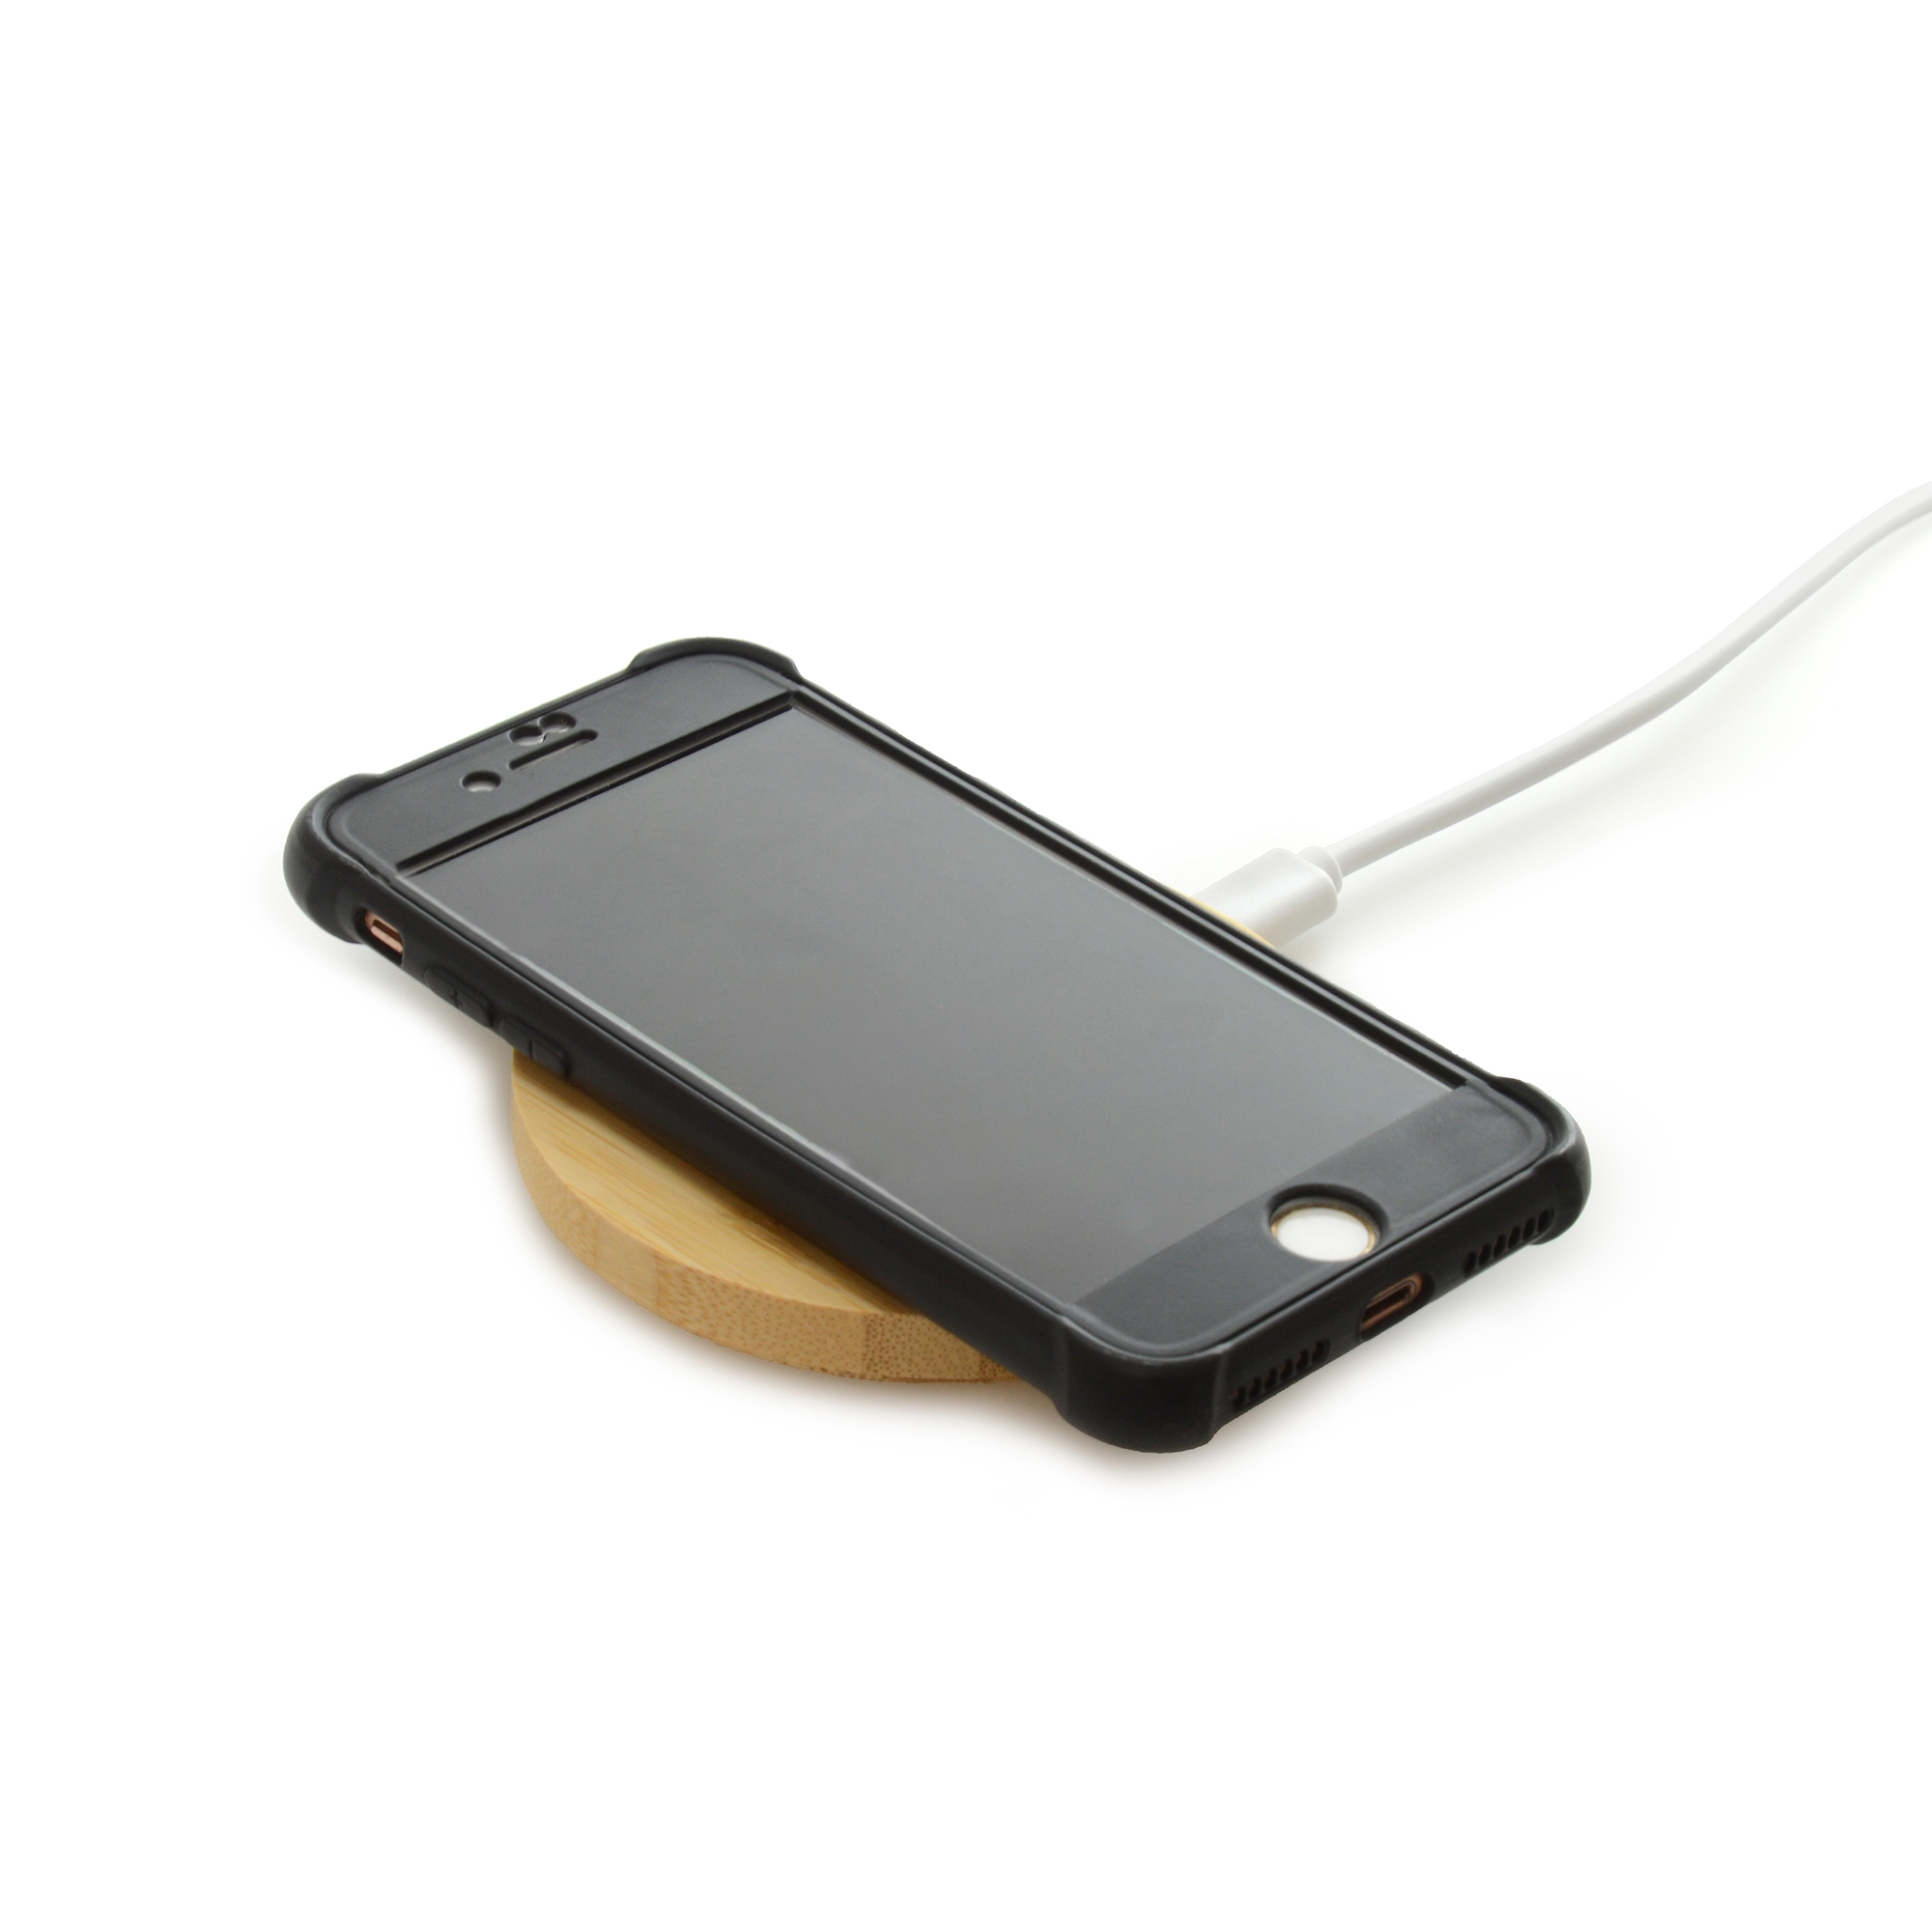 Circular bamboo 5w wireless charger with TYPE-C input port. Supplied with a 30cm USB to TYPE-C charging cable. Will charge most QI enabled devices.